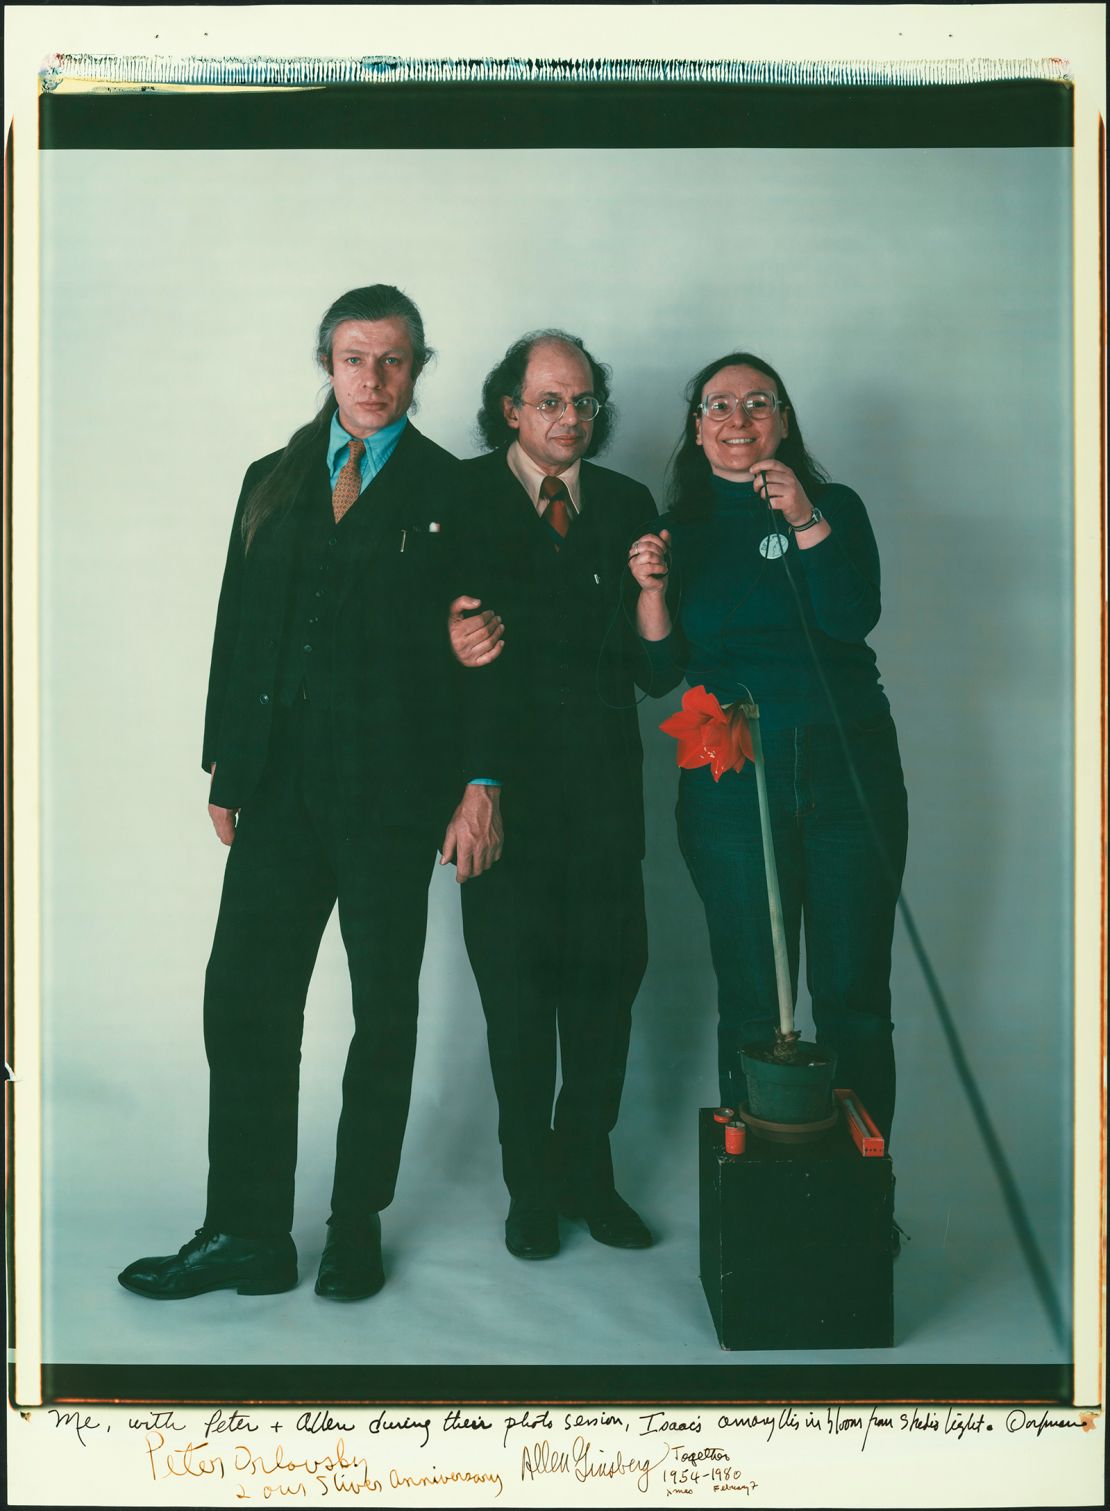 "Me, with Peter + Allen during their photo session" (1980) by Elsa Dorfman.